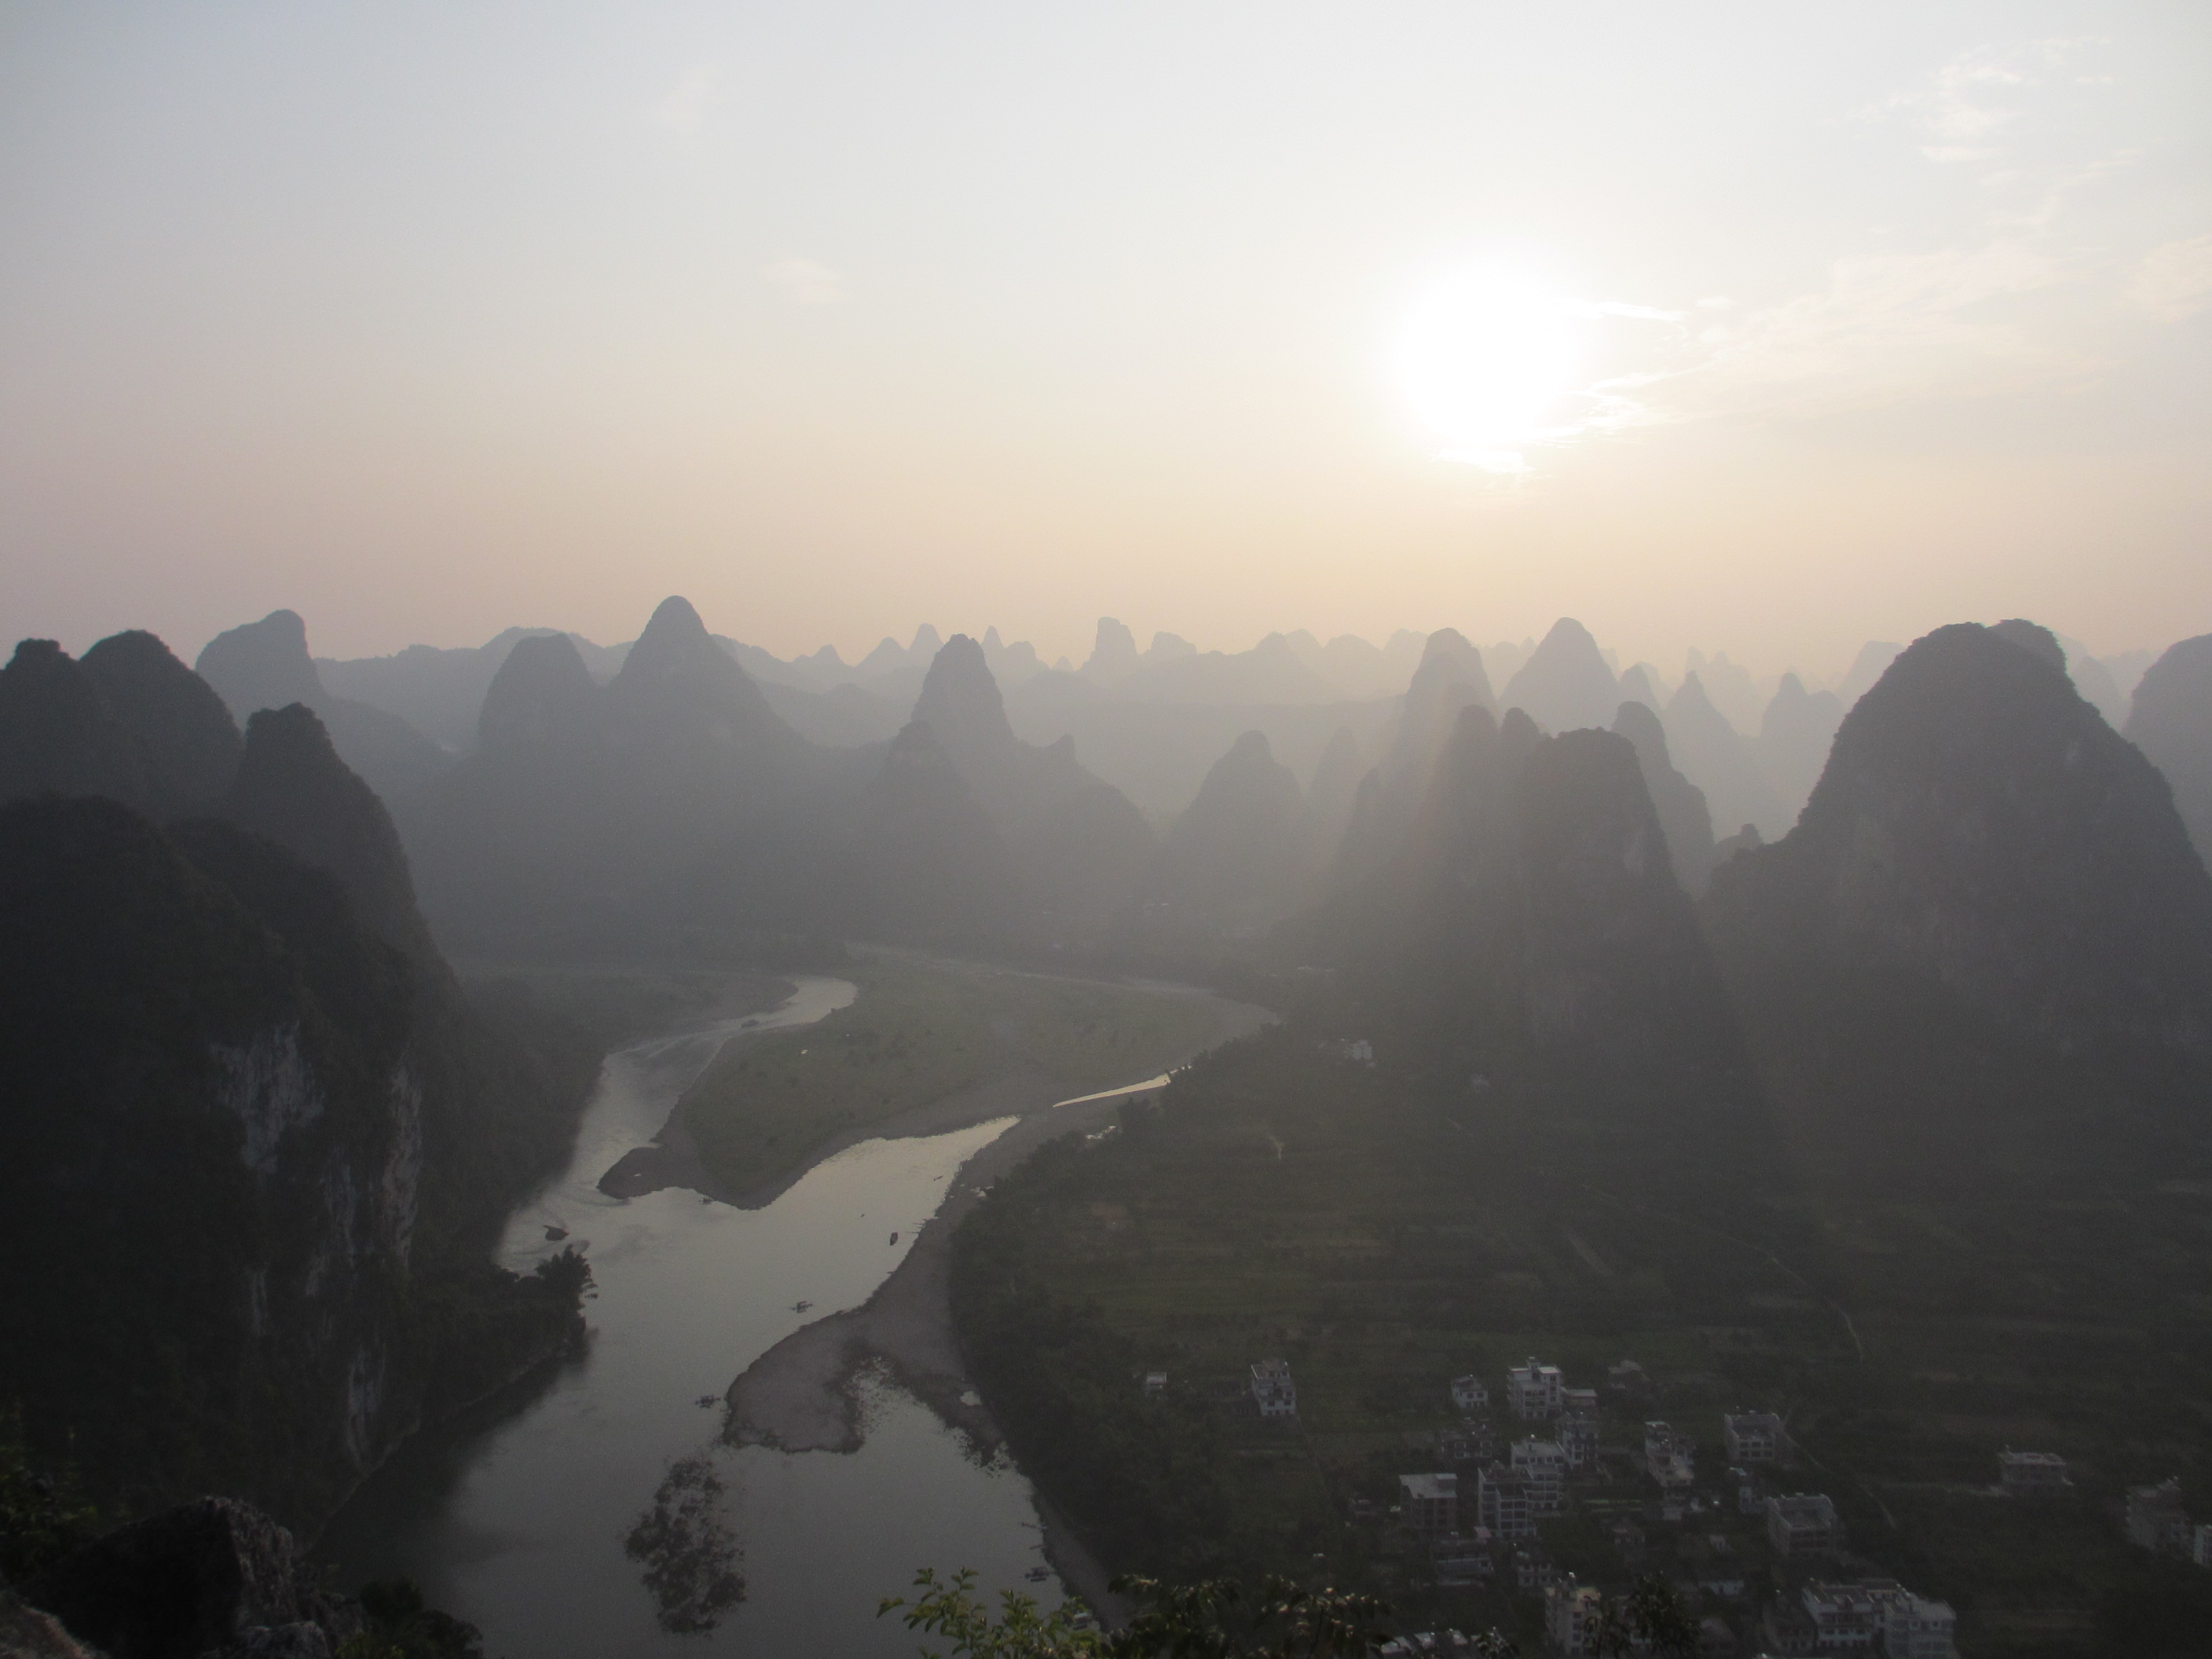 I climbed to top of one of the Karst hills (220 meters) in Xing Ping to take picture of surrounding hills along Li Jiang river towards Yang Shuo. 